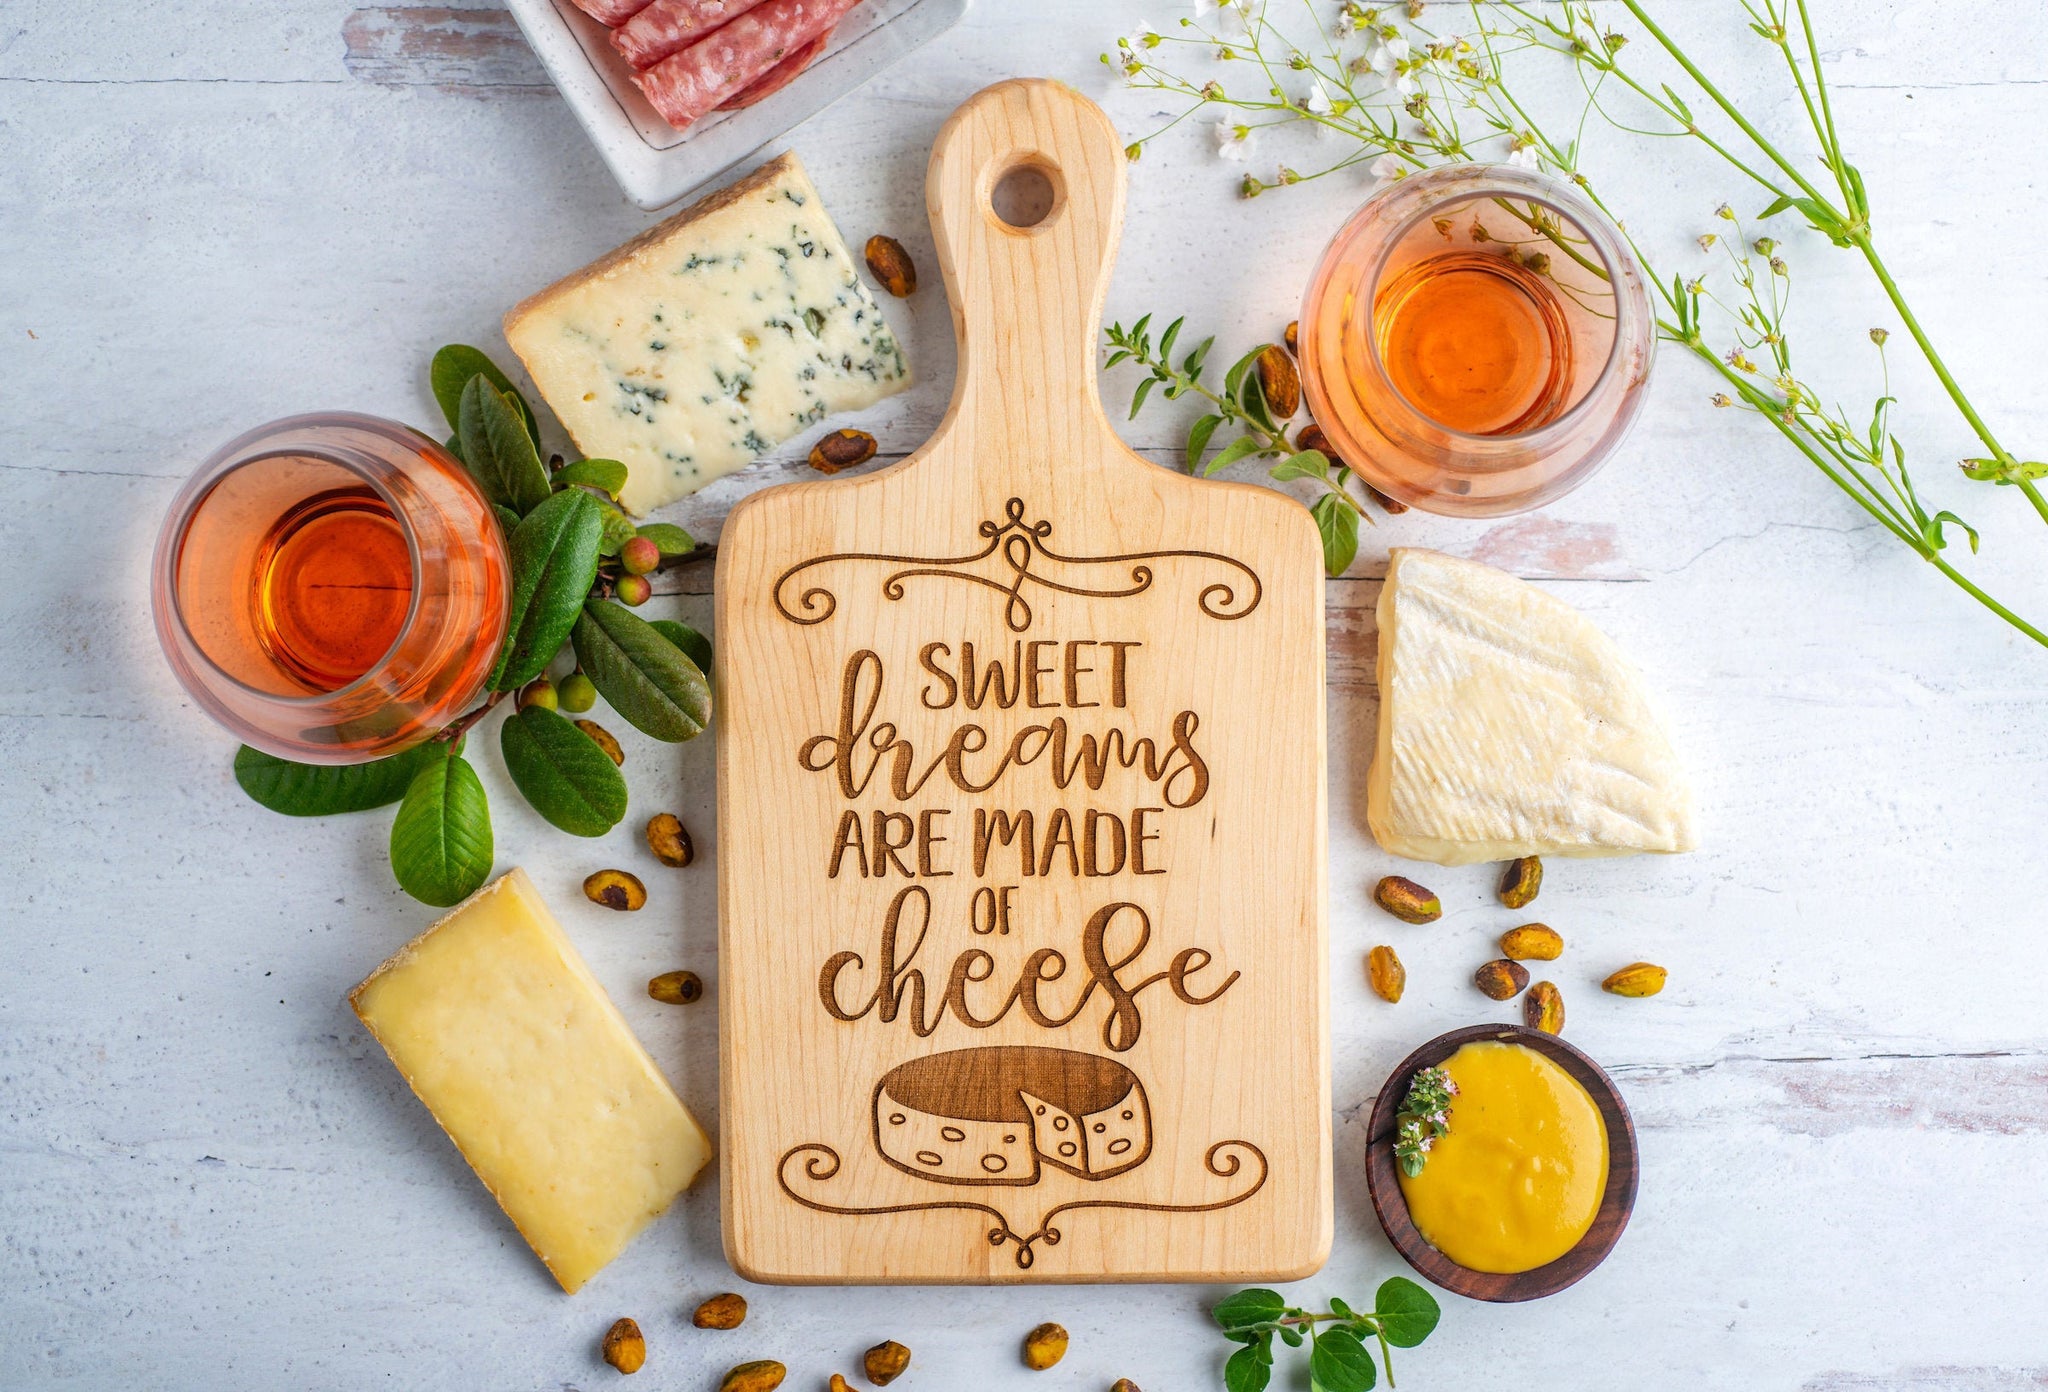 How To Display Cutting Boards In A Kitchen - Inspiration For Moms